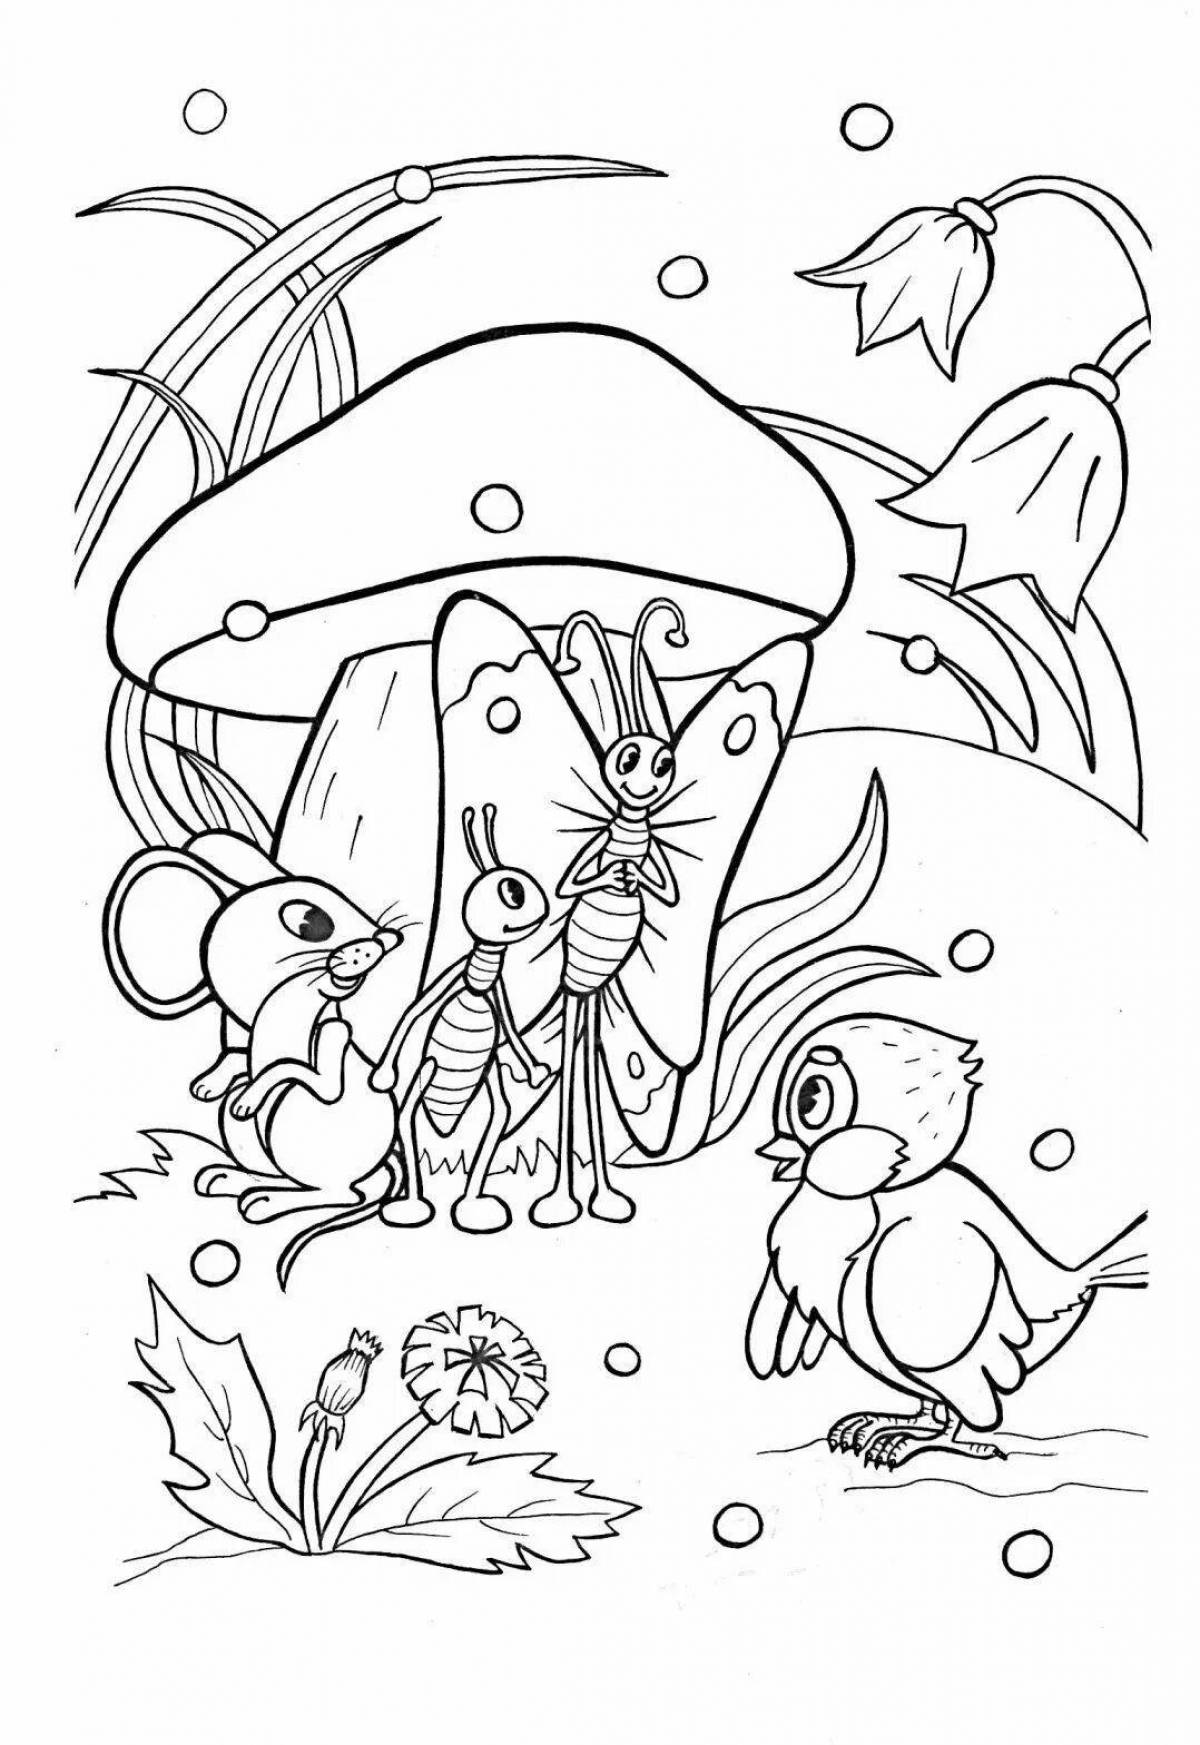 Exquisite fairy tale coloring book for girls